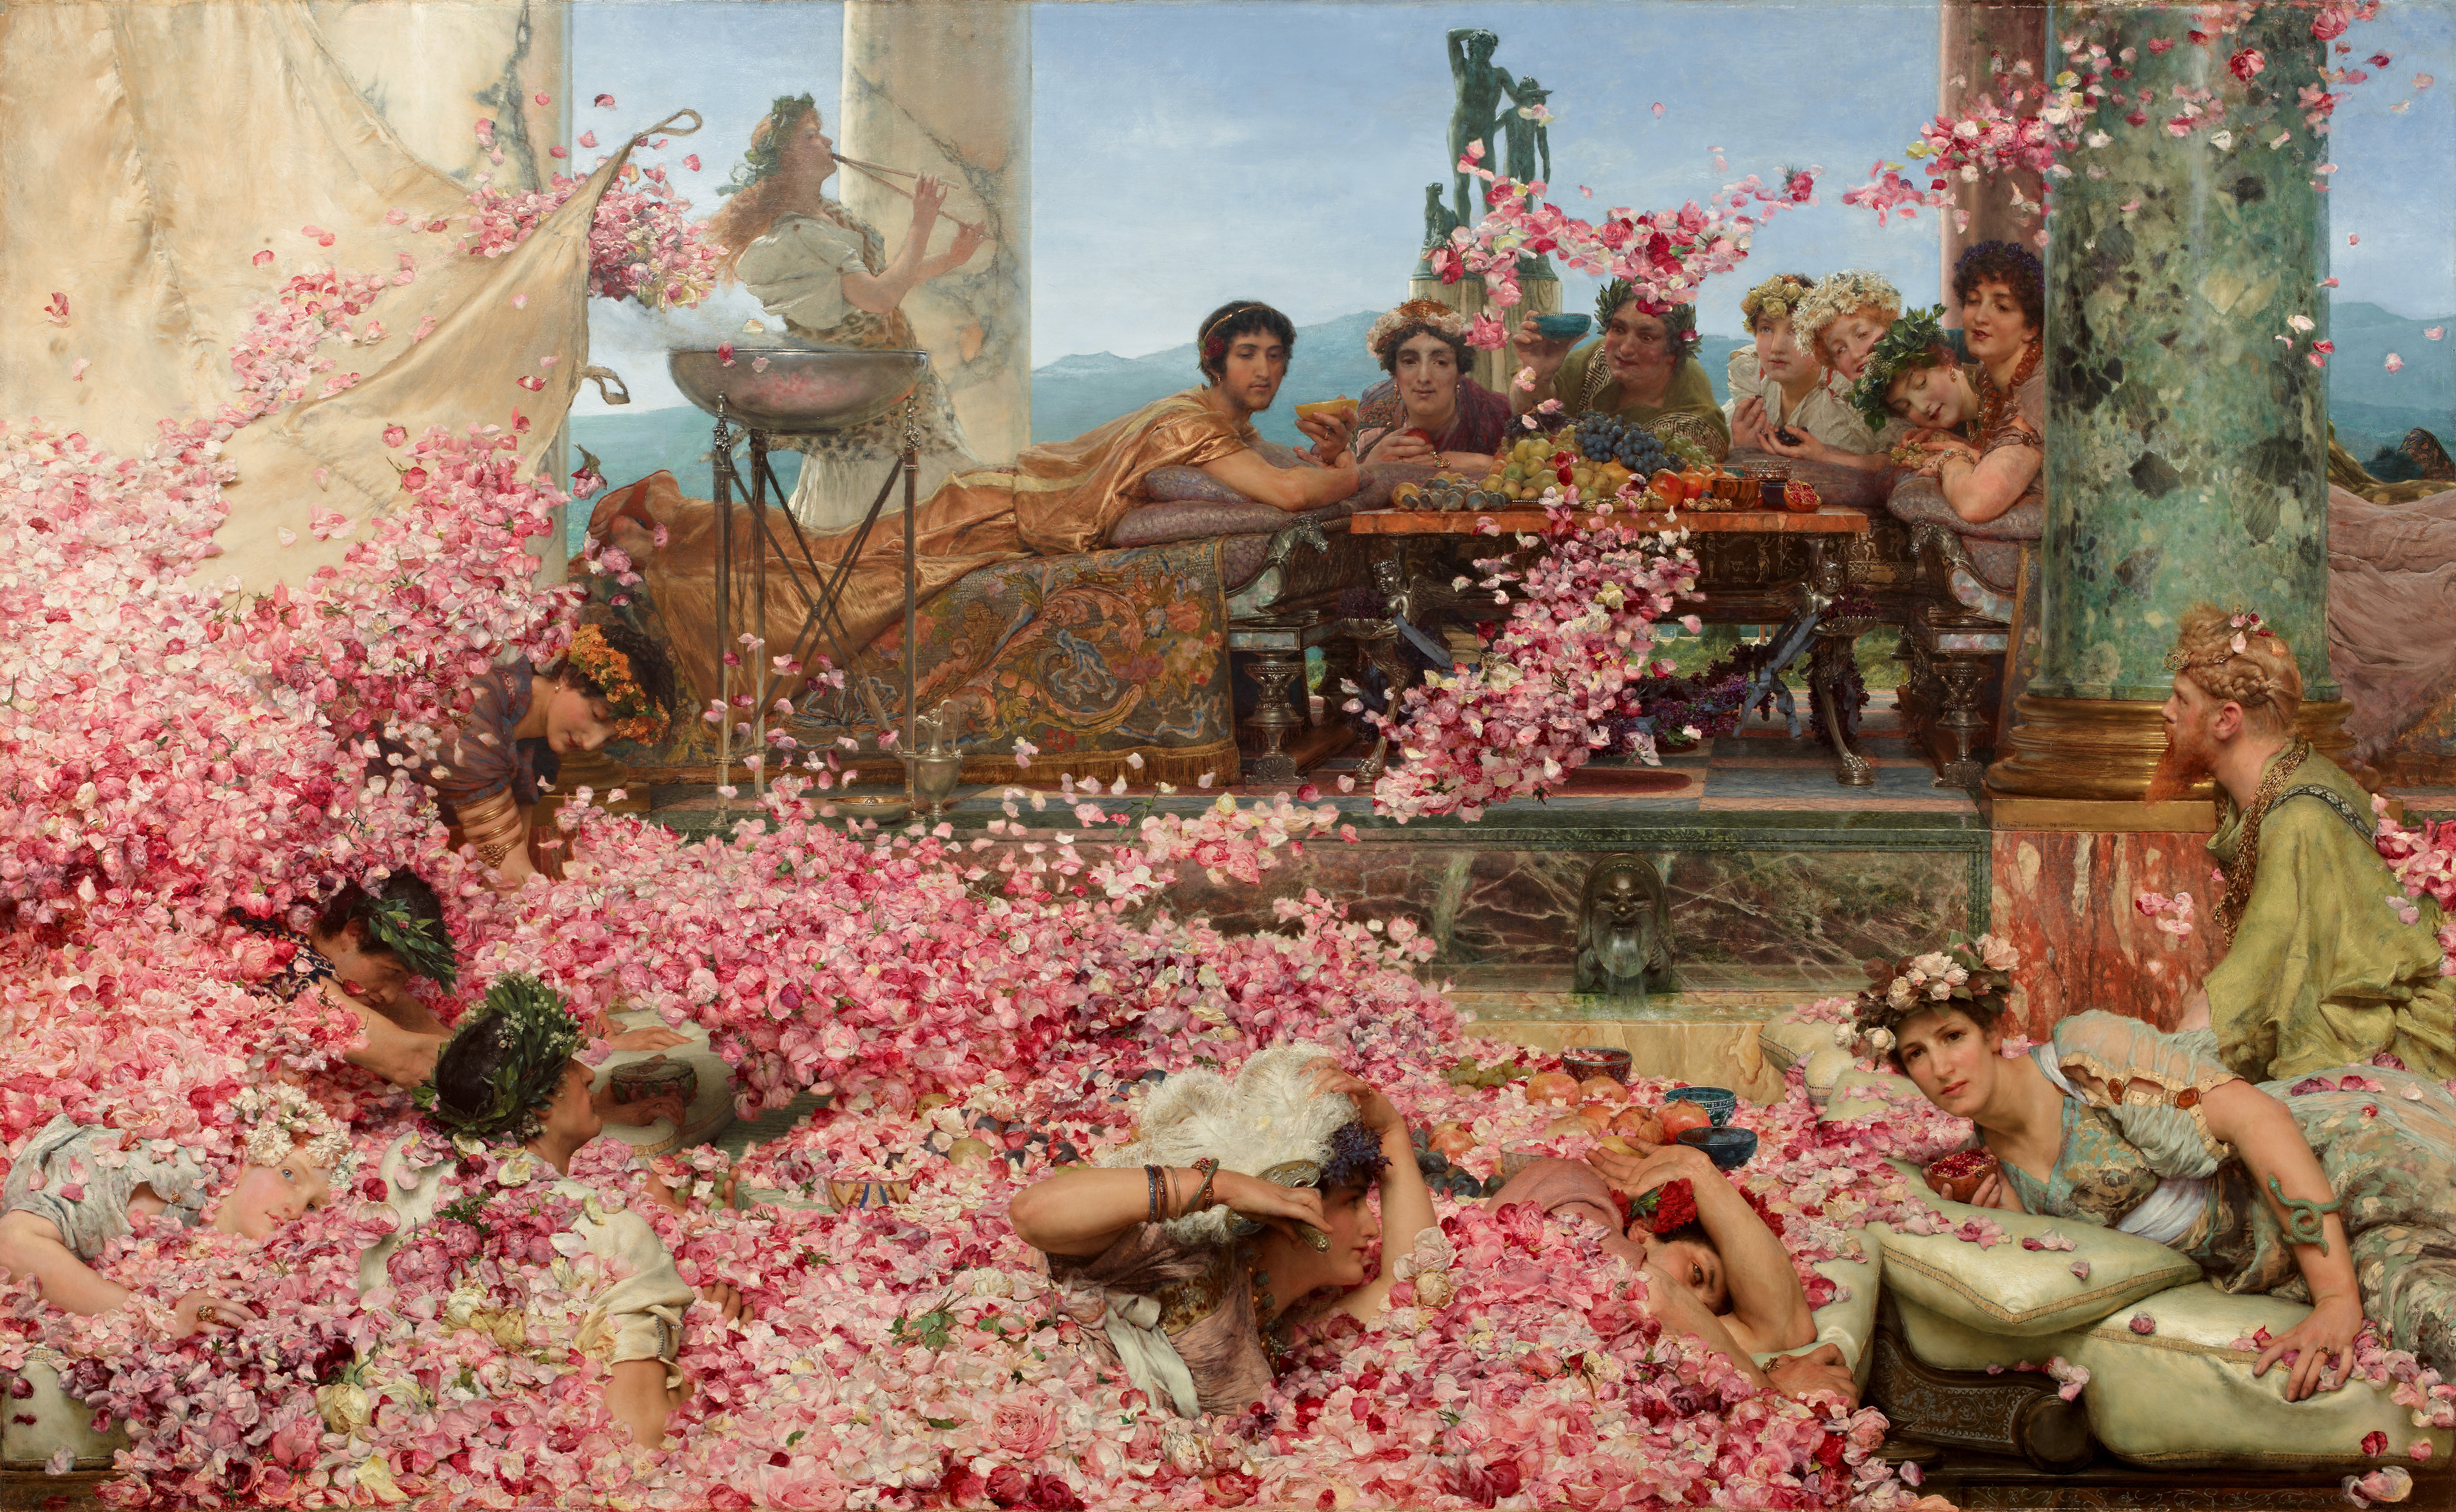 Sex Scenes The Queer Roman Orgy Where Everyone Was Suffocated by Rose Petals